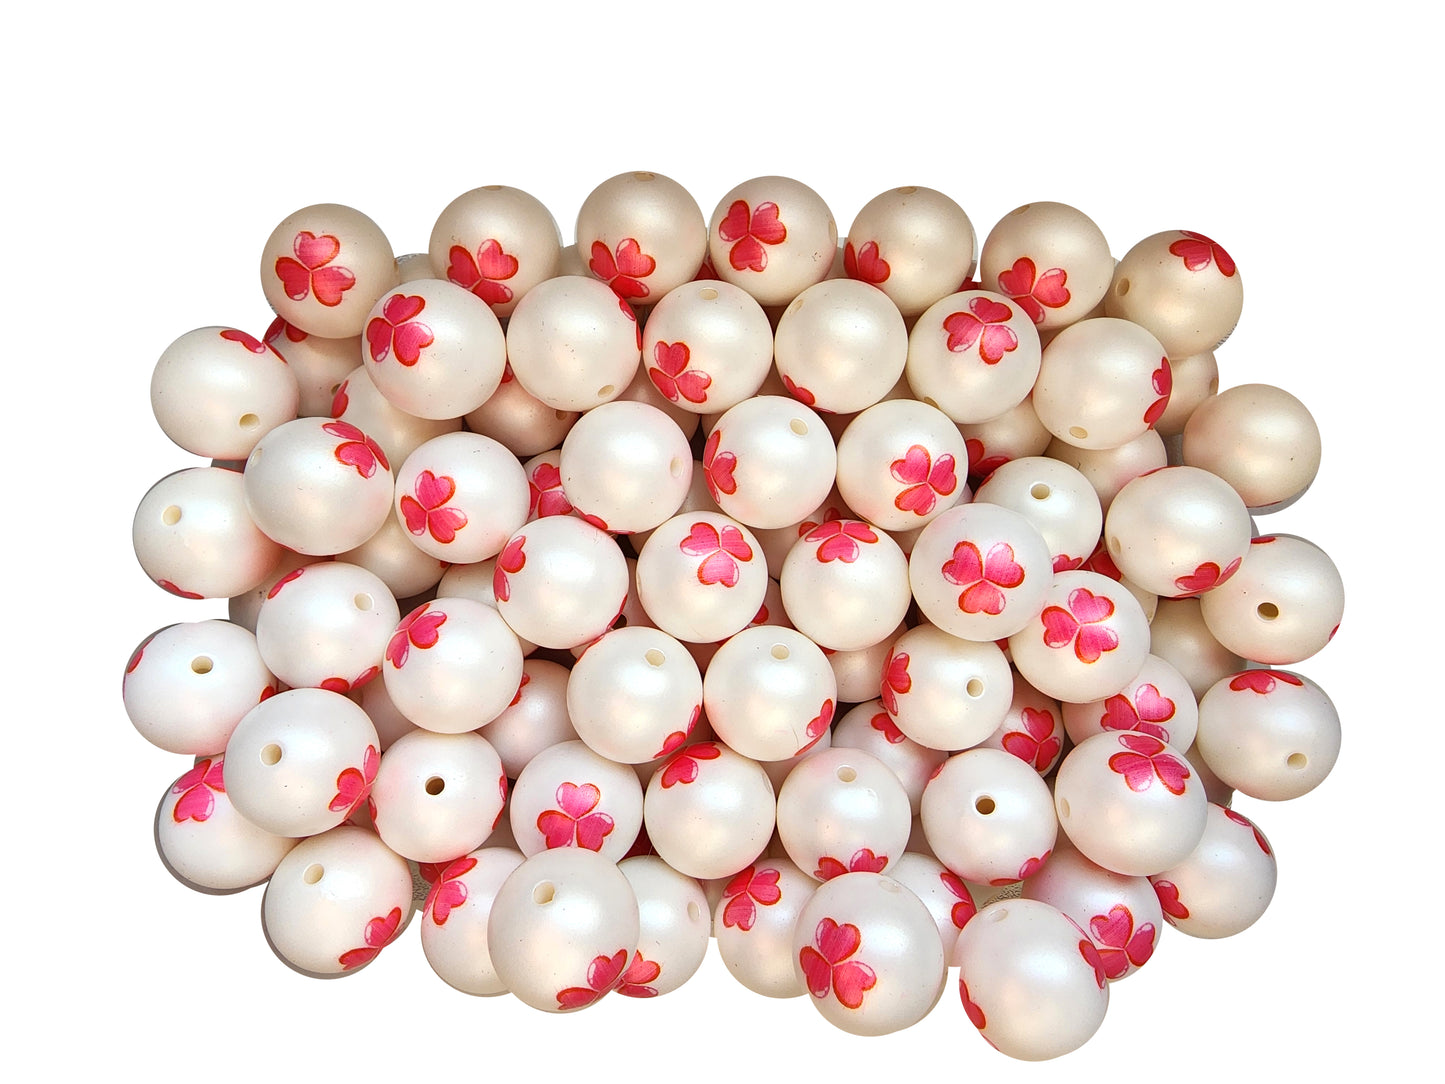 clover of hearts 20mm printed wholesale bubblegum beads